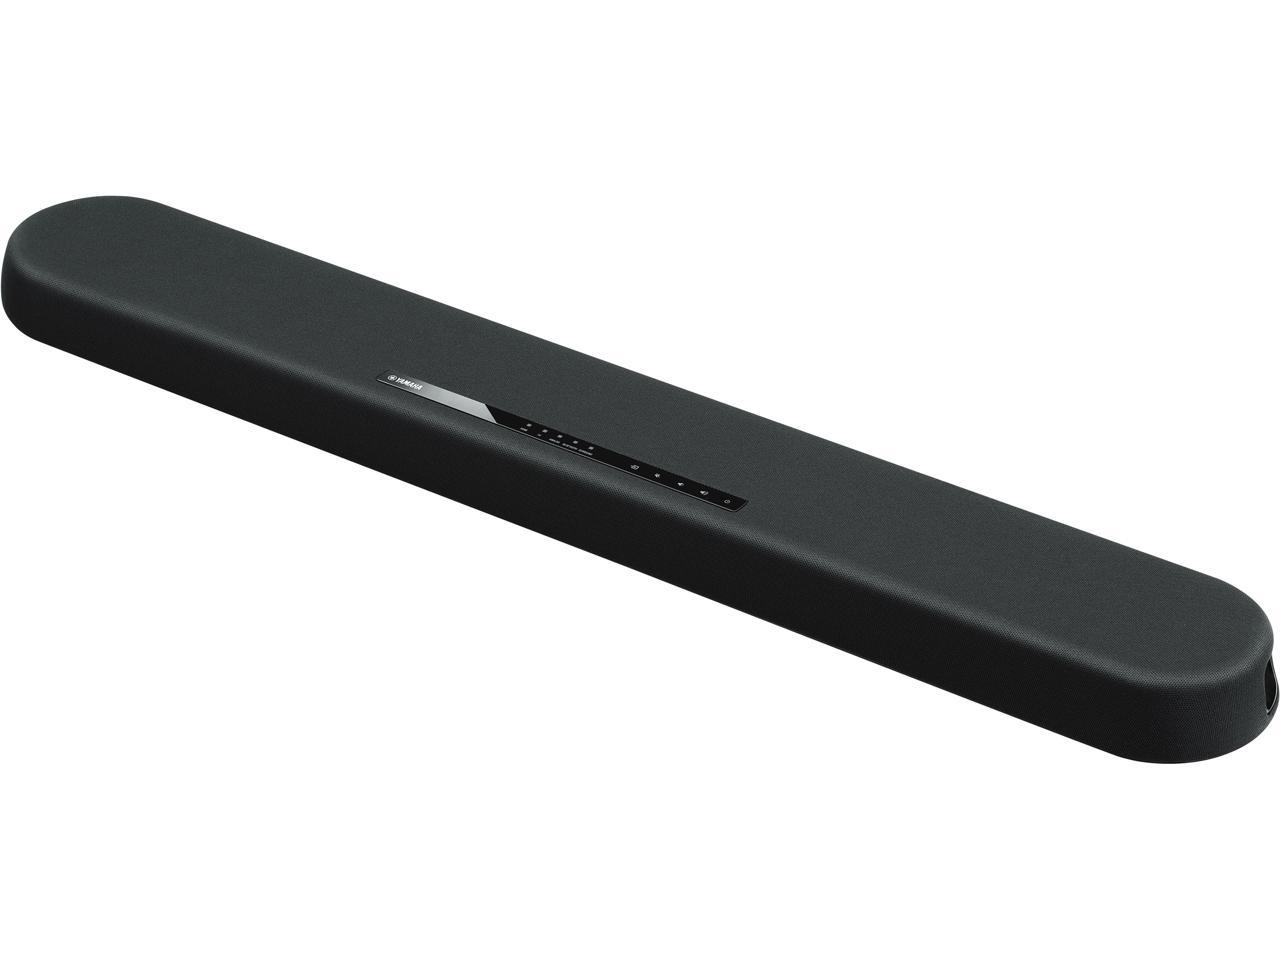 Yamaha YAS-108 Sound Bar with Built-in Subwoofers & Bluetooth 